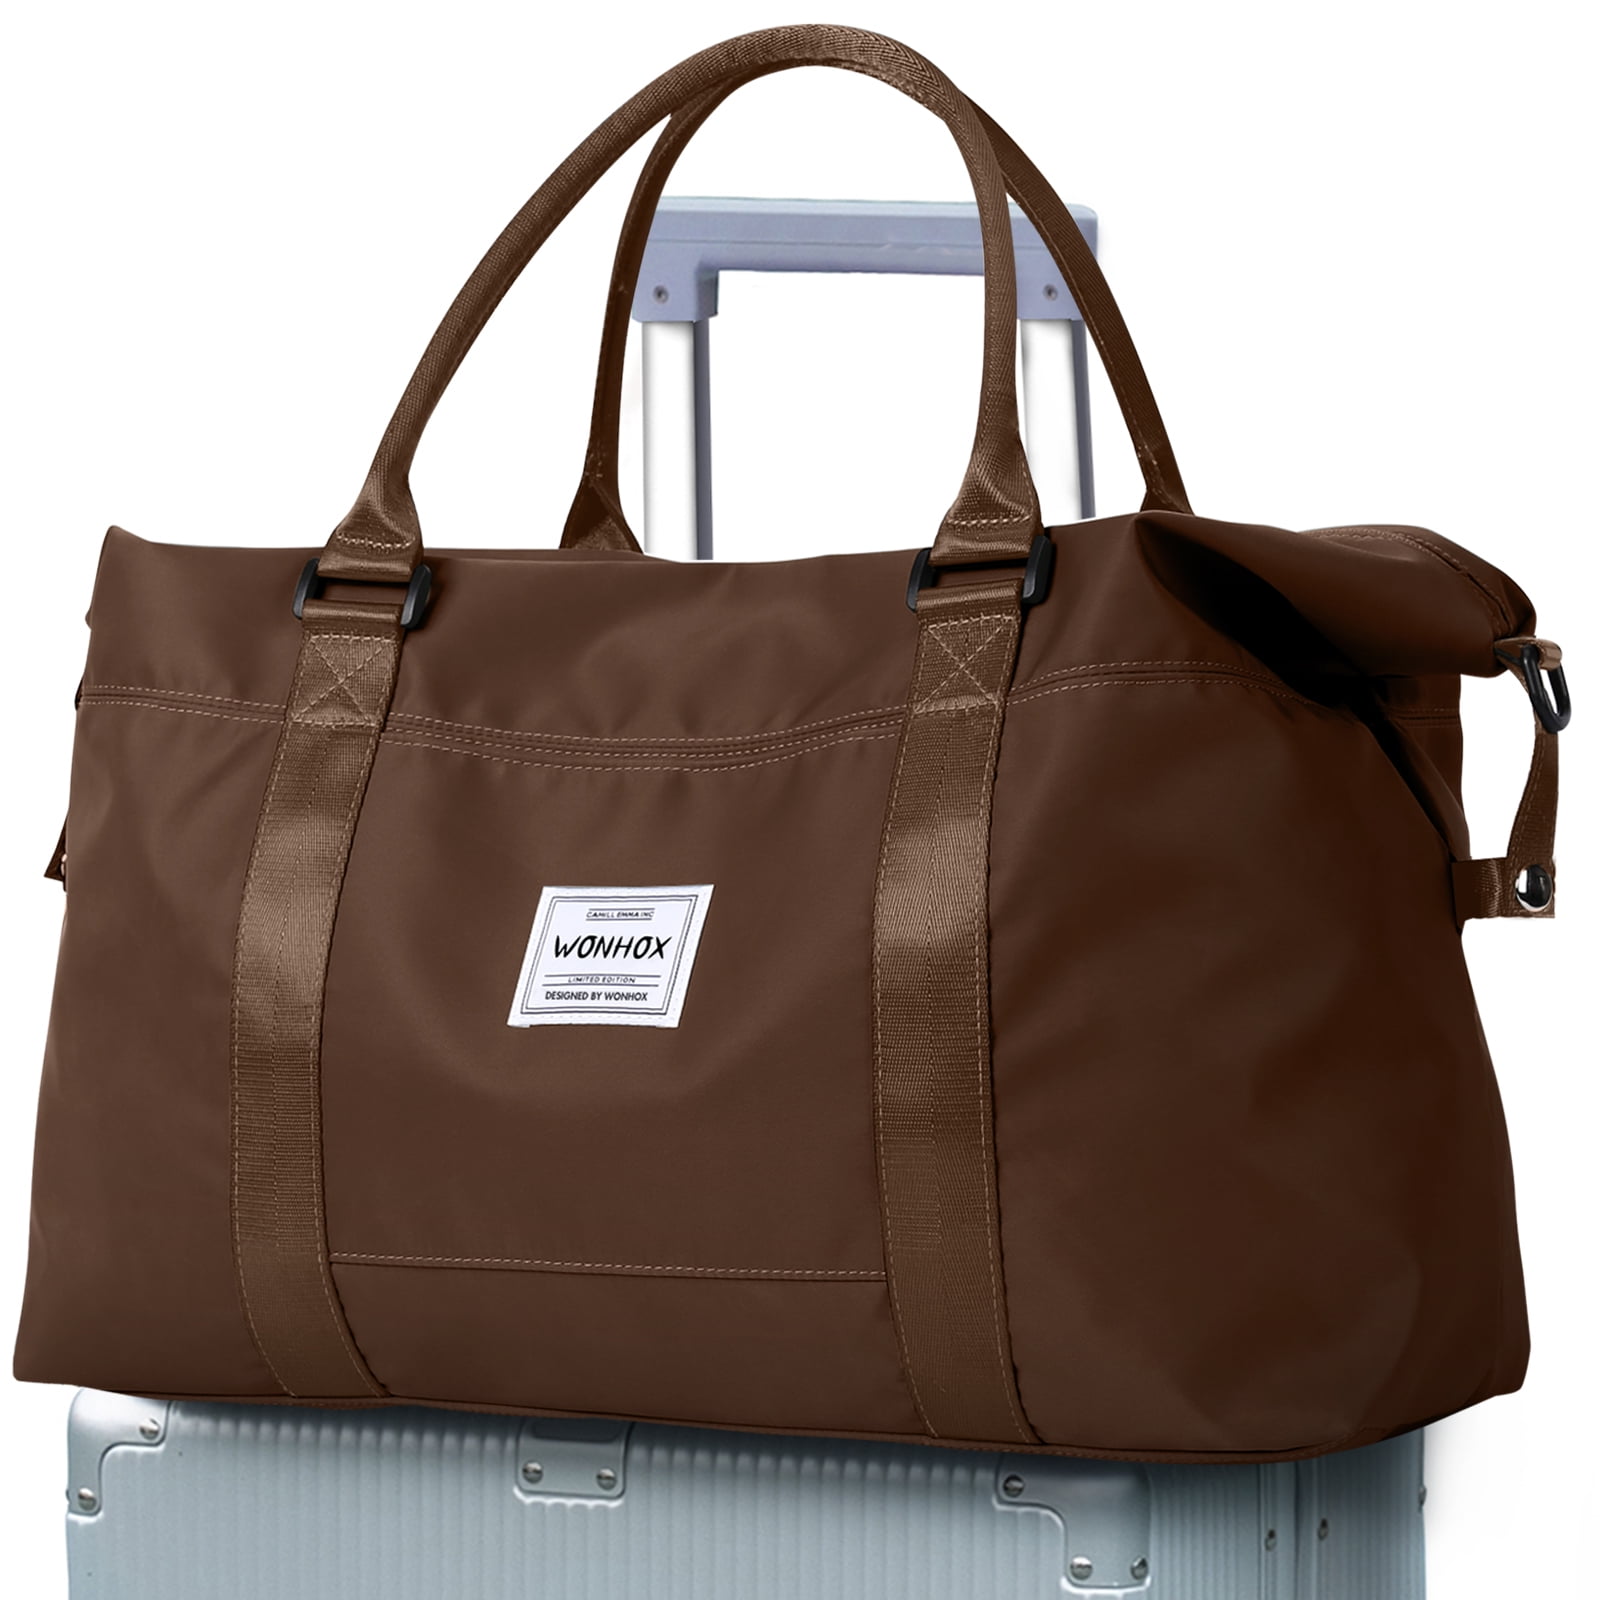 Everlane's Quilted Weekender Tote Review: the Perfect Travel Bag